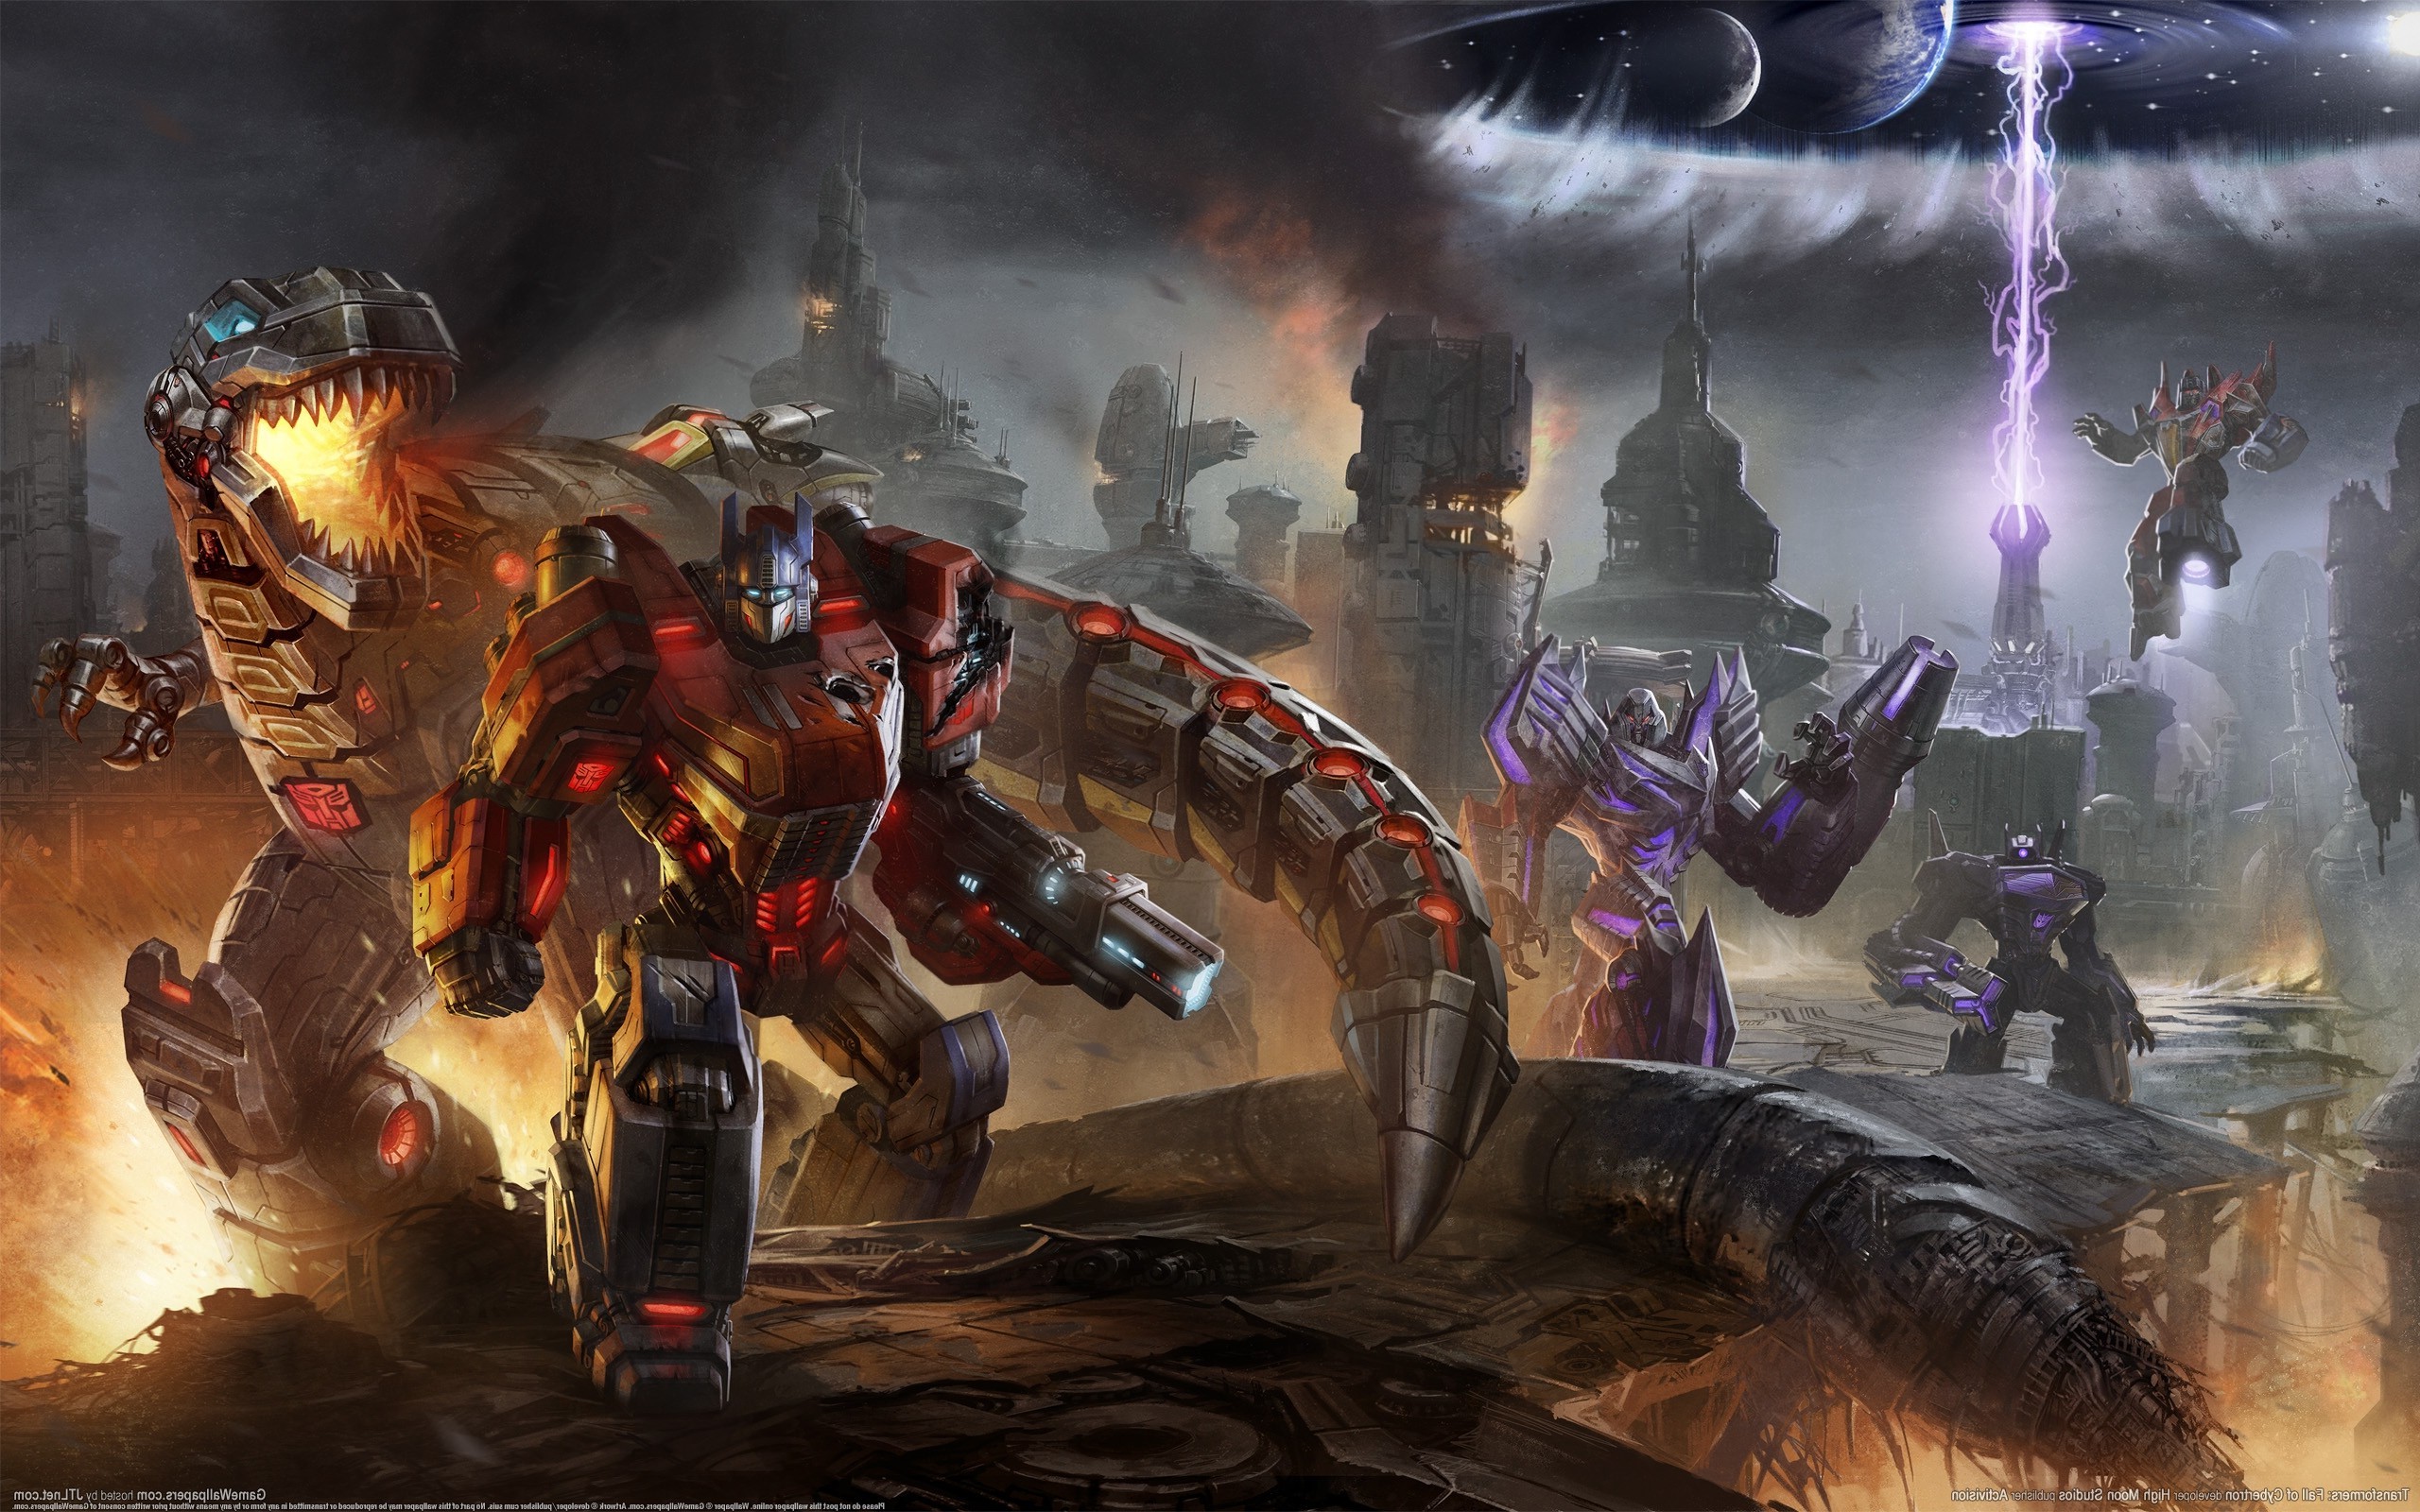 transformers desktop wallpaper,action adventure game,pc game,strategy video game,games,demon